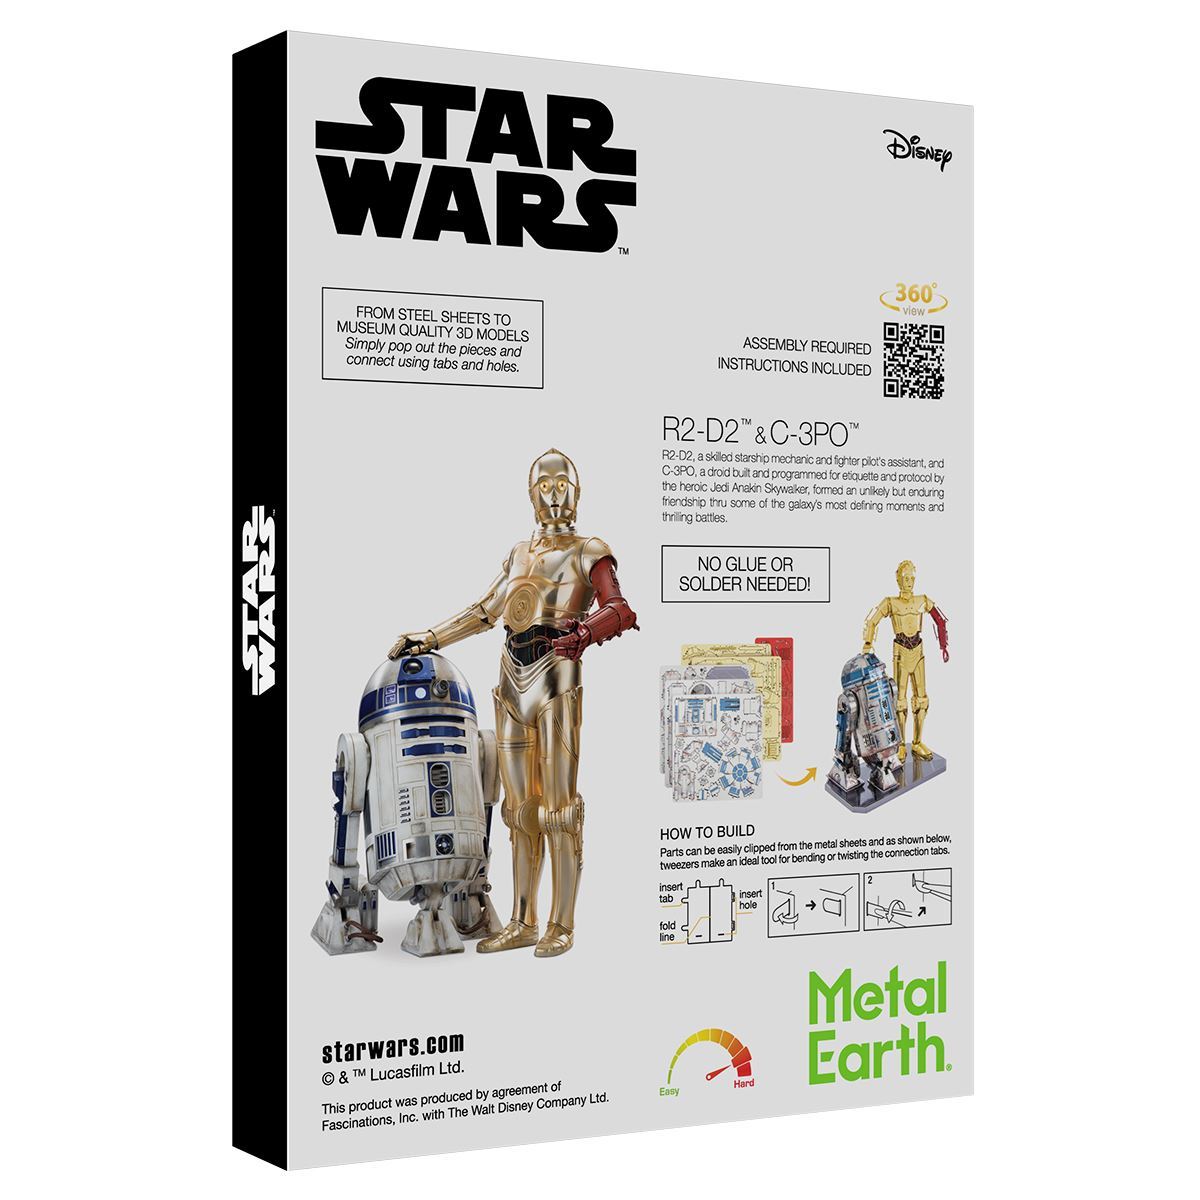 C-3PO & R2-D2 - Steel 3D Model Kit - Metal Earth gift puzzle puzzle